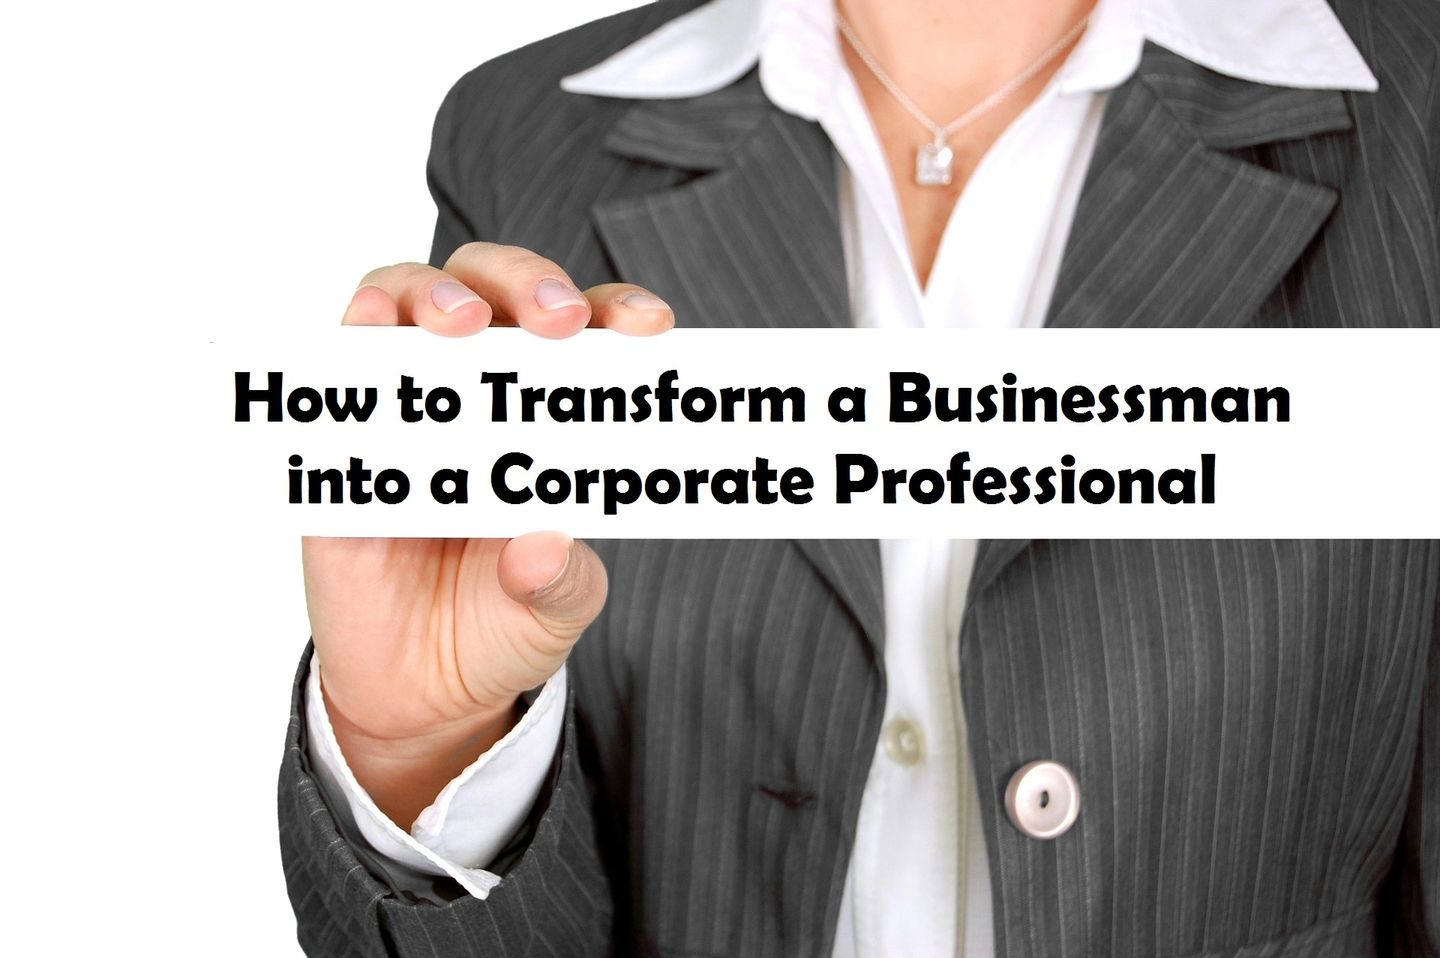 How to Transform a Businessman into a Corporate Professional